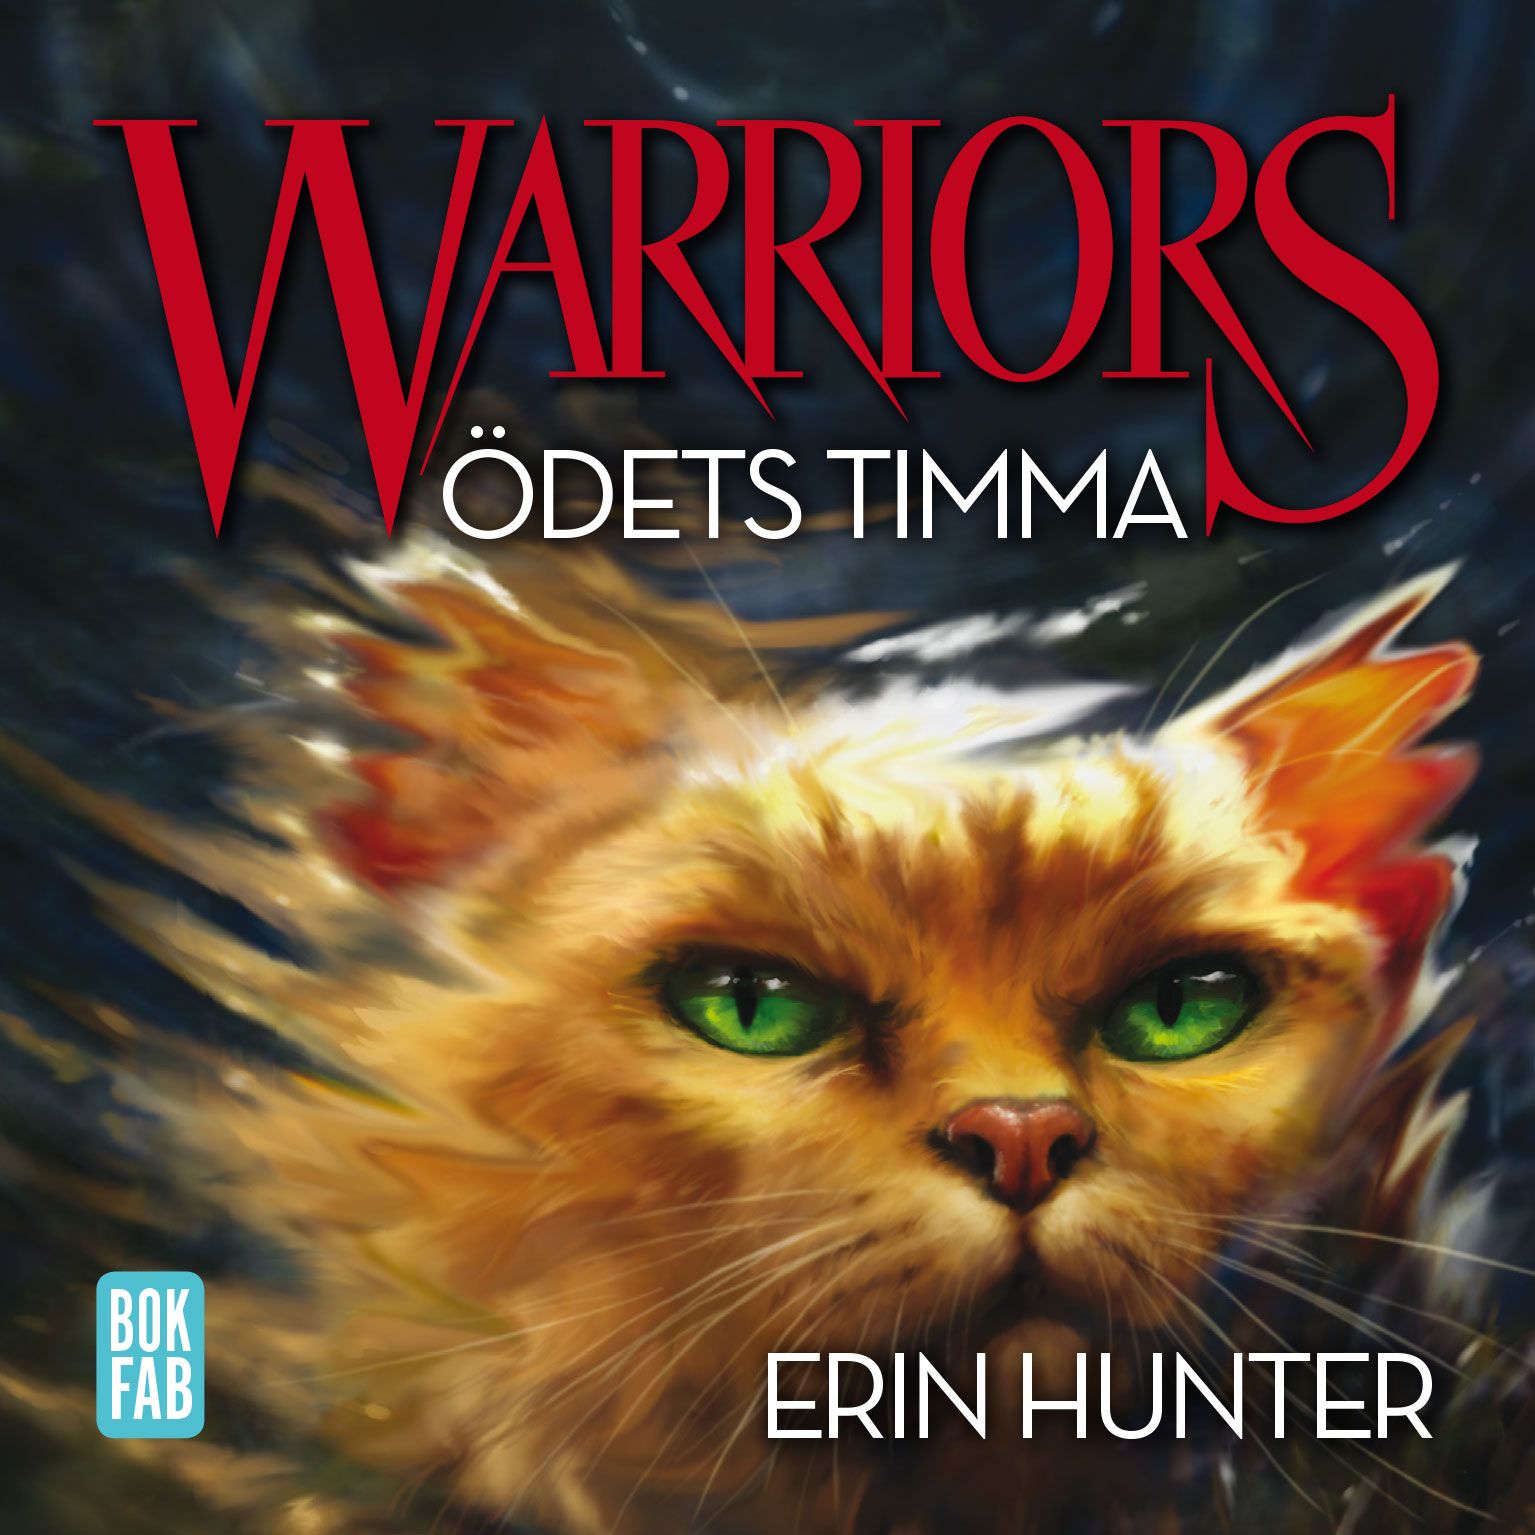 Warriors - Ödets timma, audiobook by Erin Hunter